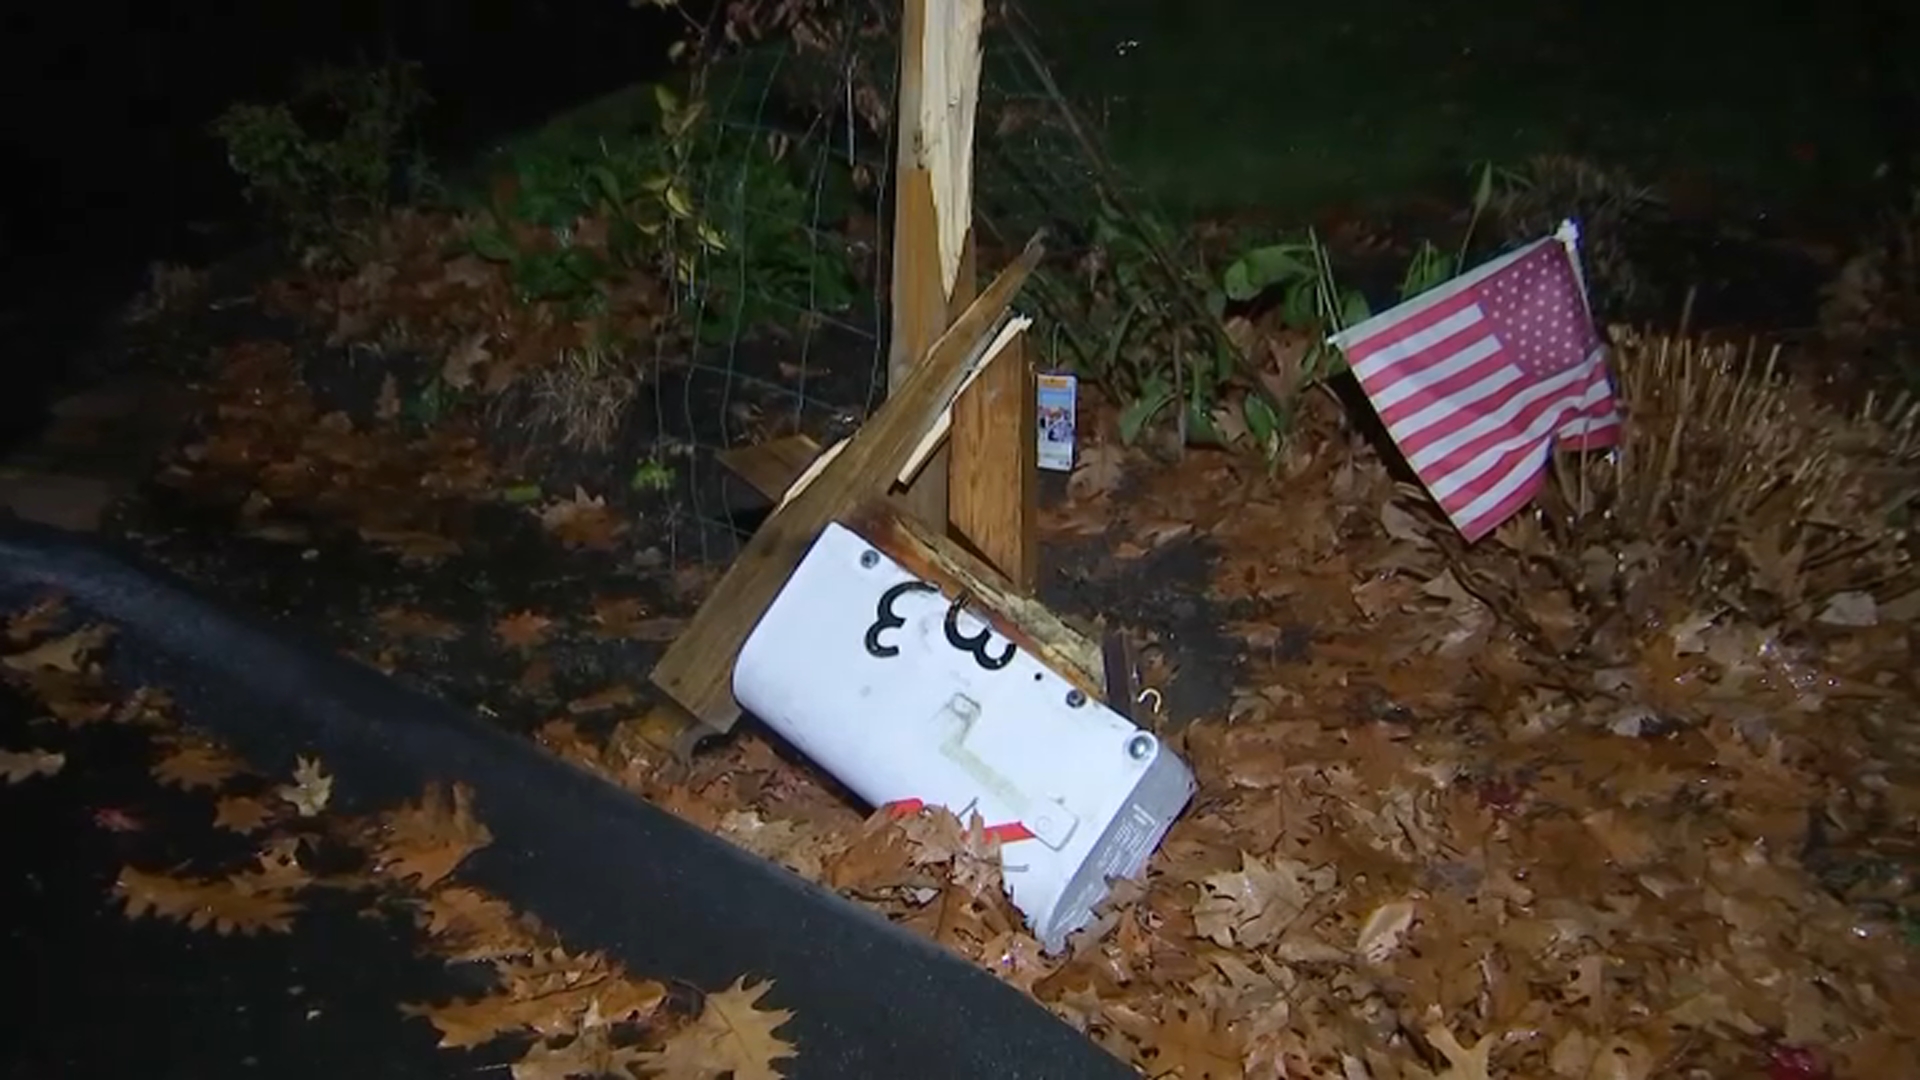 Residents Wake Up to Vandalized Mailboxes in Billerica